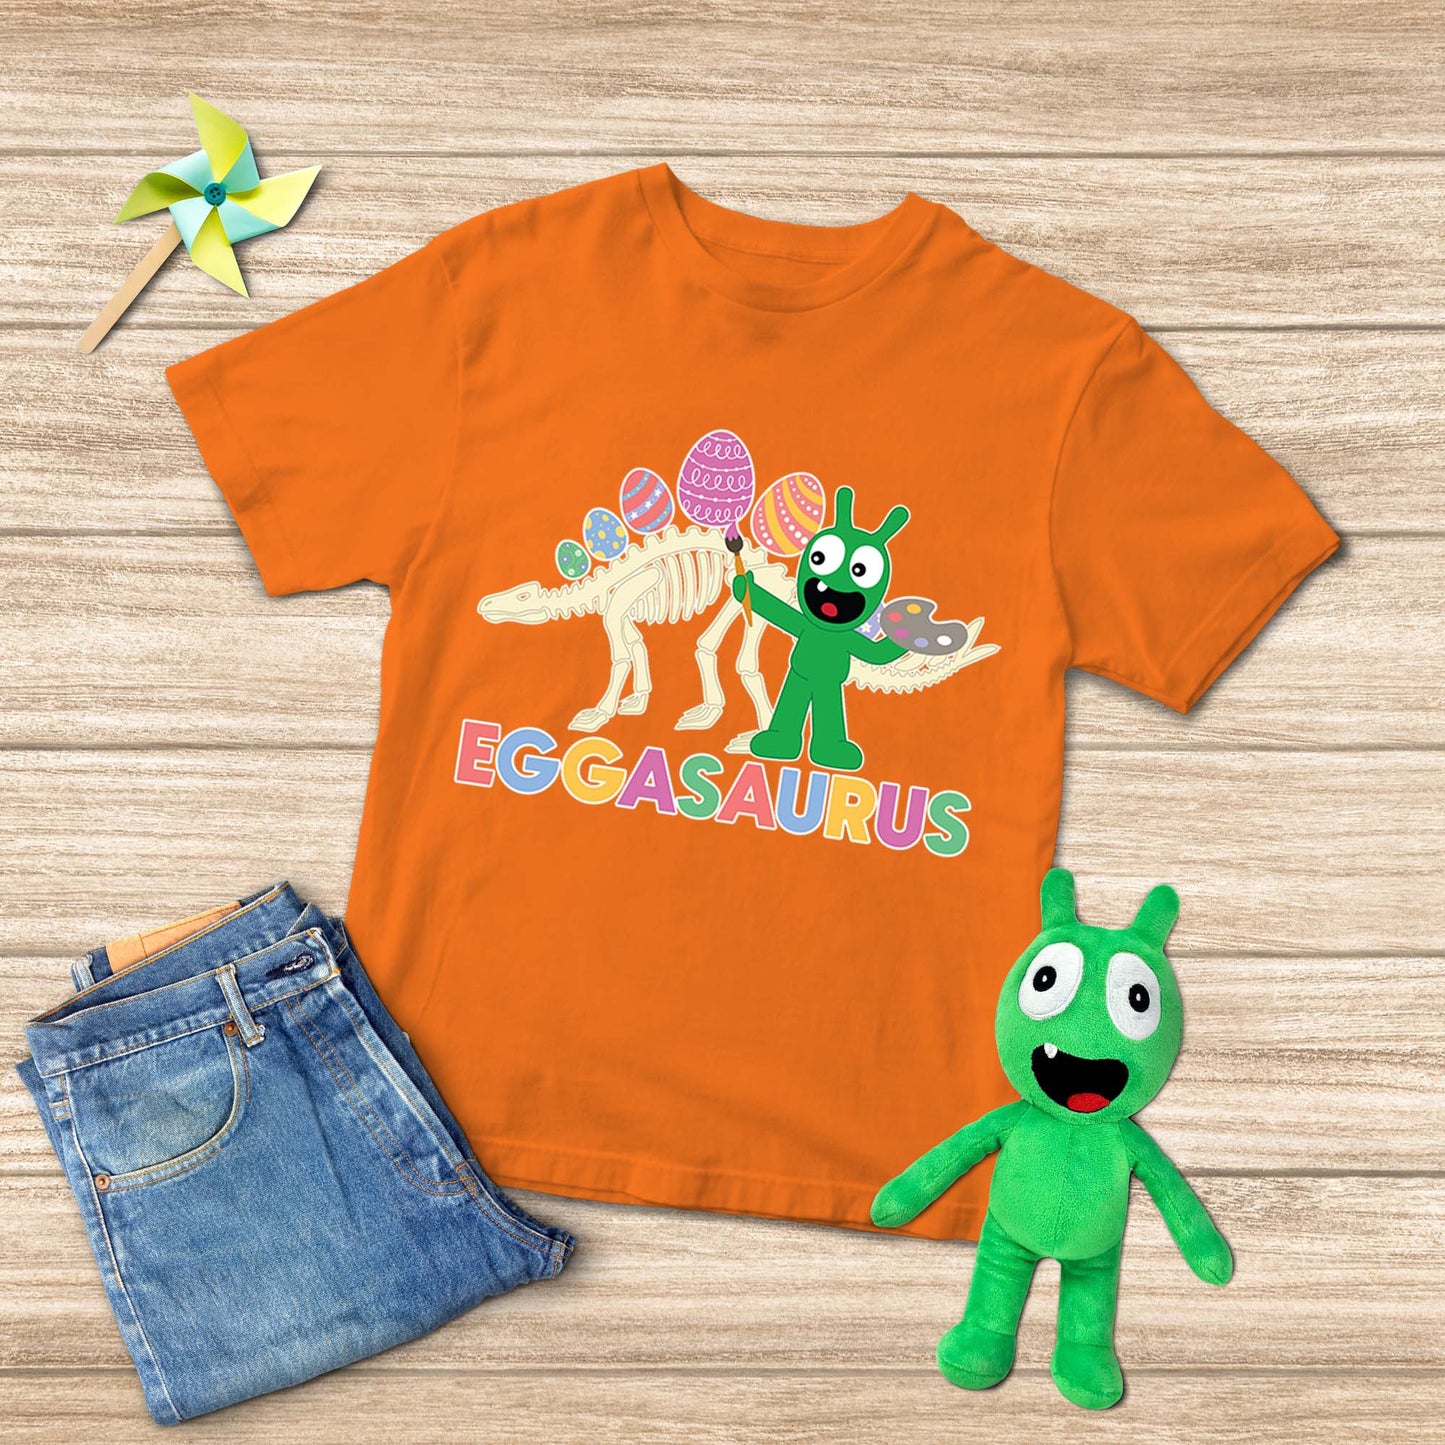 Pea Pea Coloring Eggs Youth T-Shirt, Eggasaurus Shirts Easters Day Gifts